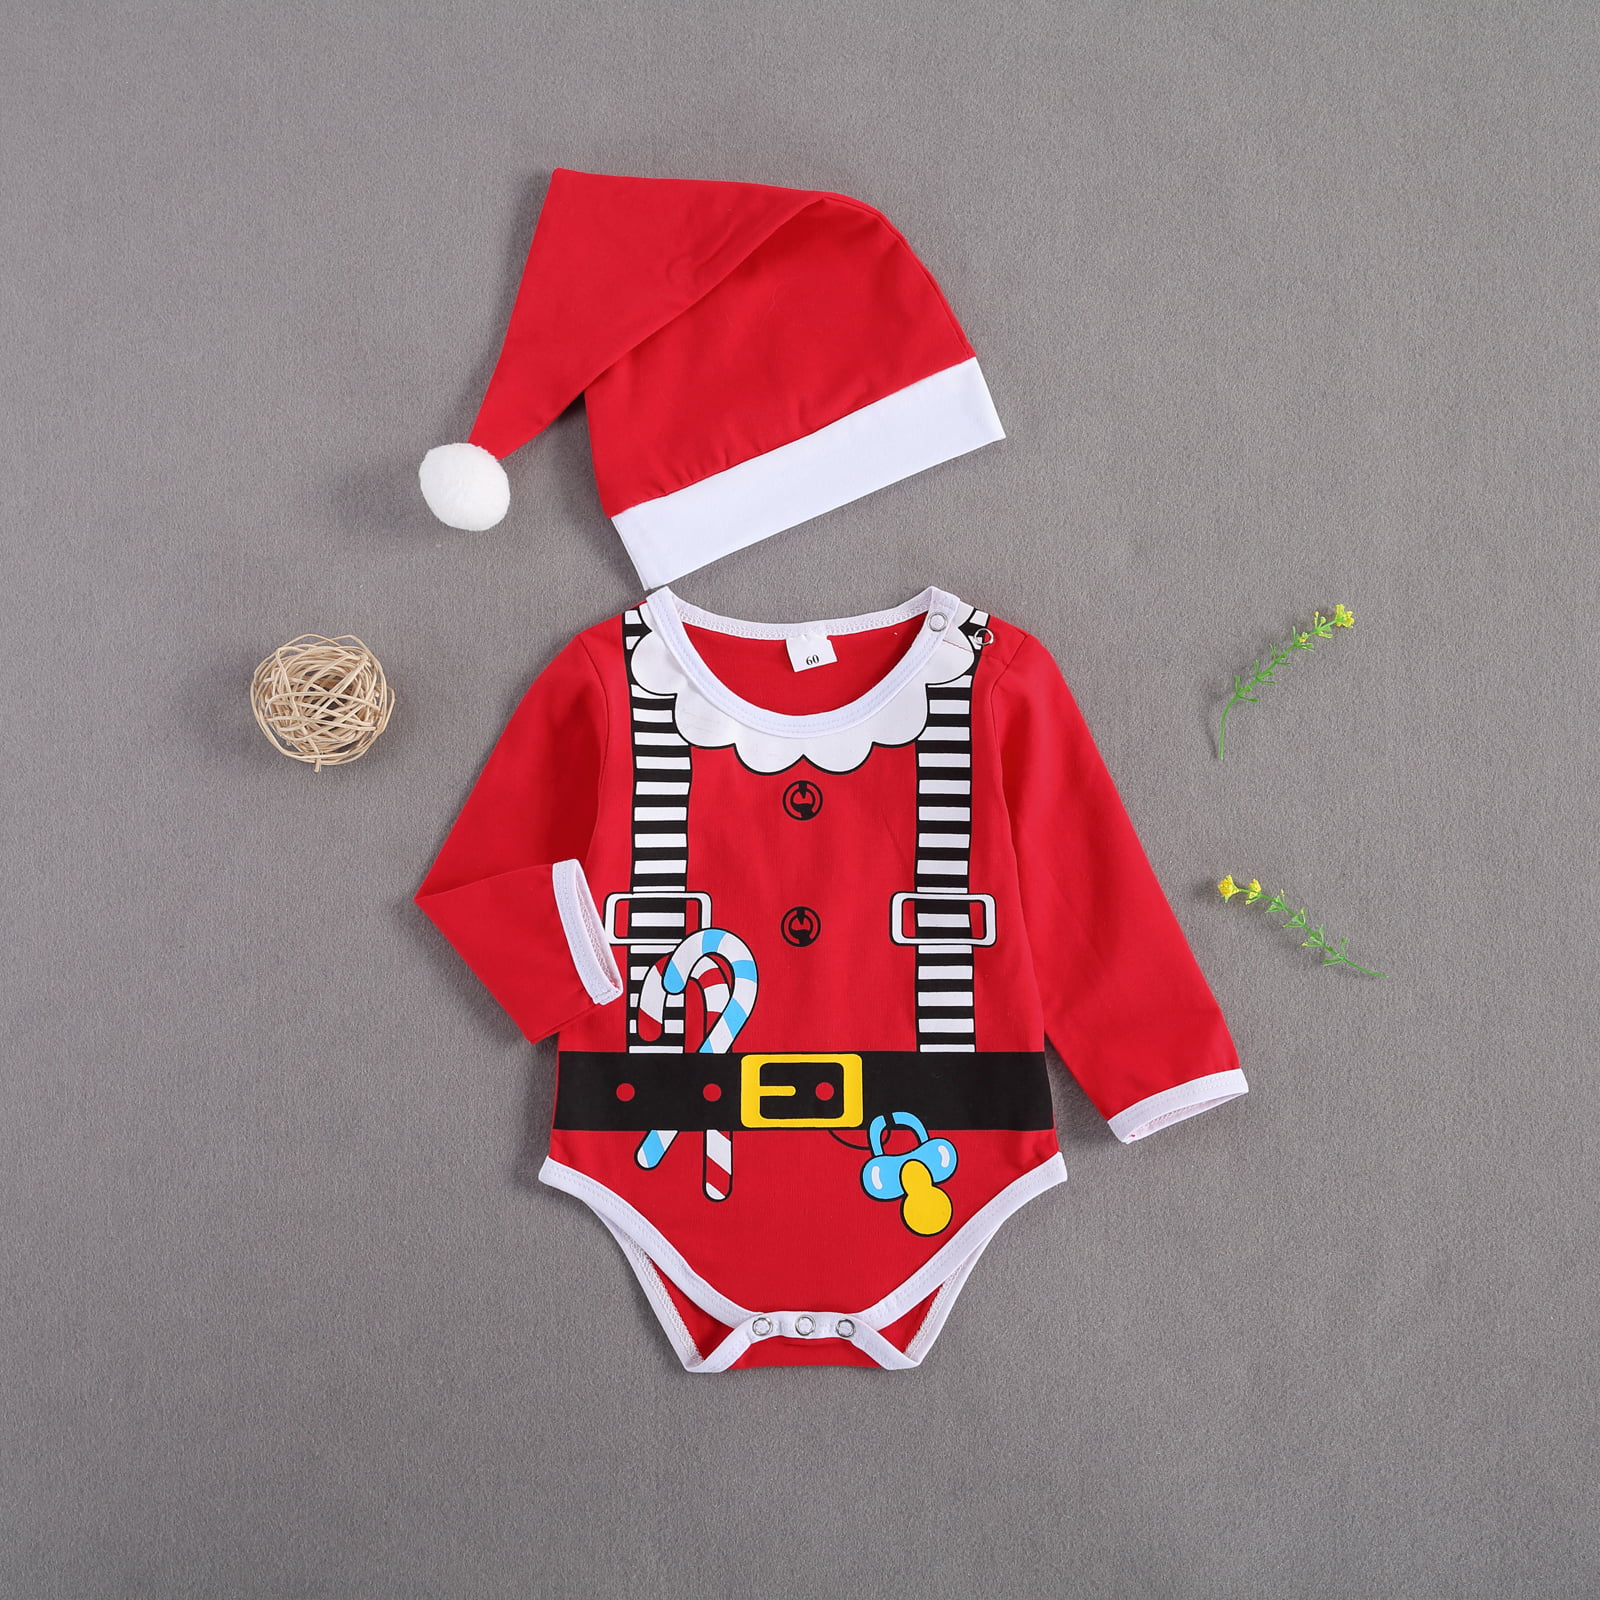 Details about   New Baby Kids Christmas Santa Claus Cosplay Costume Romper Jumpsuit Hat Bib US 